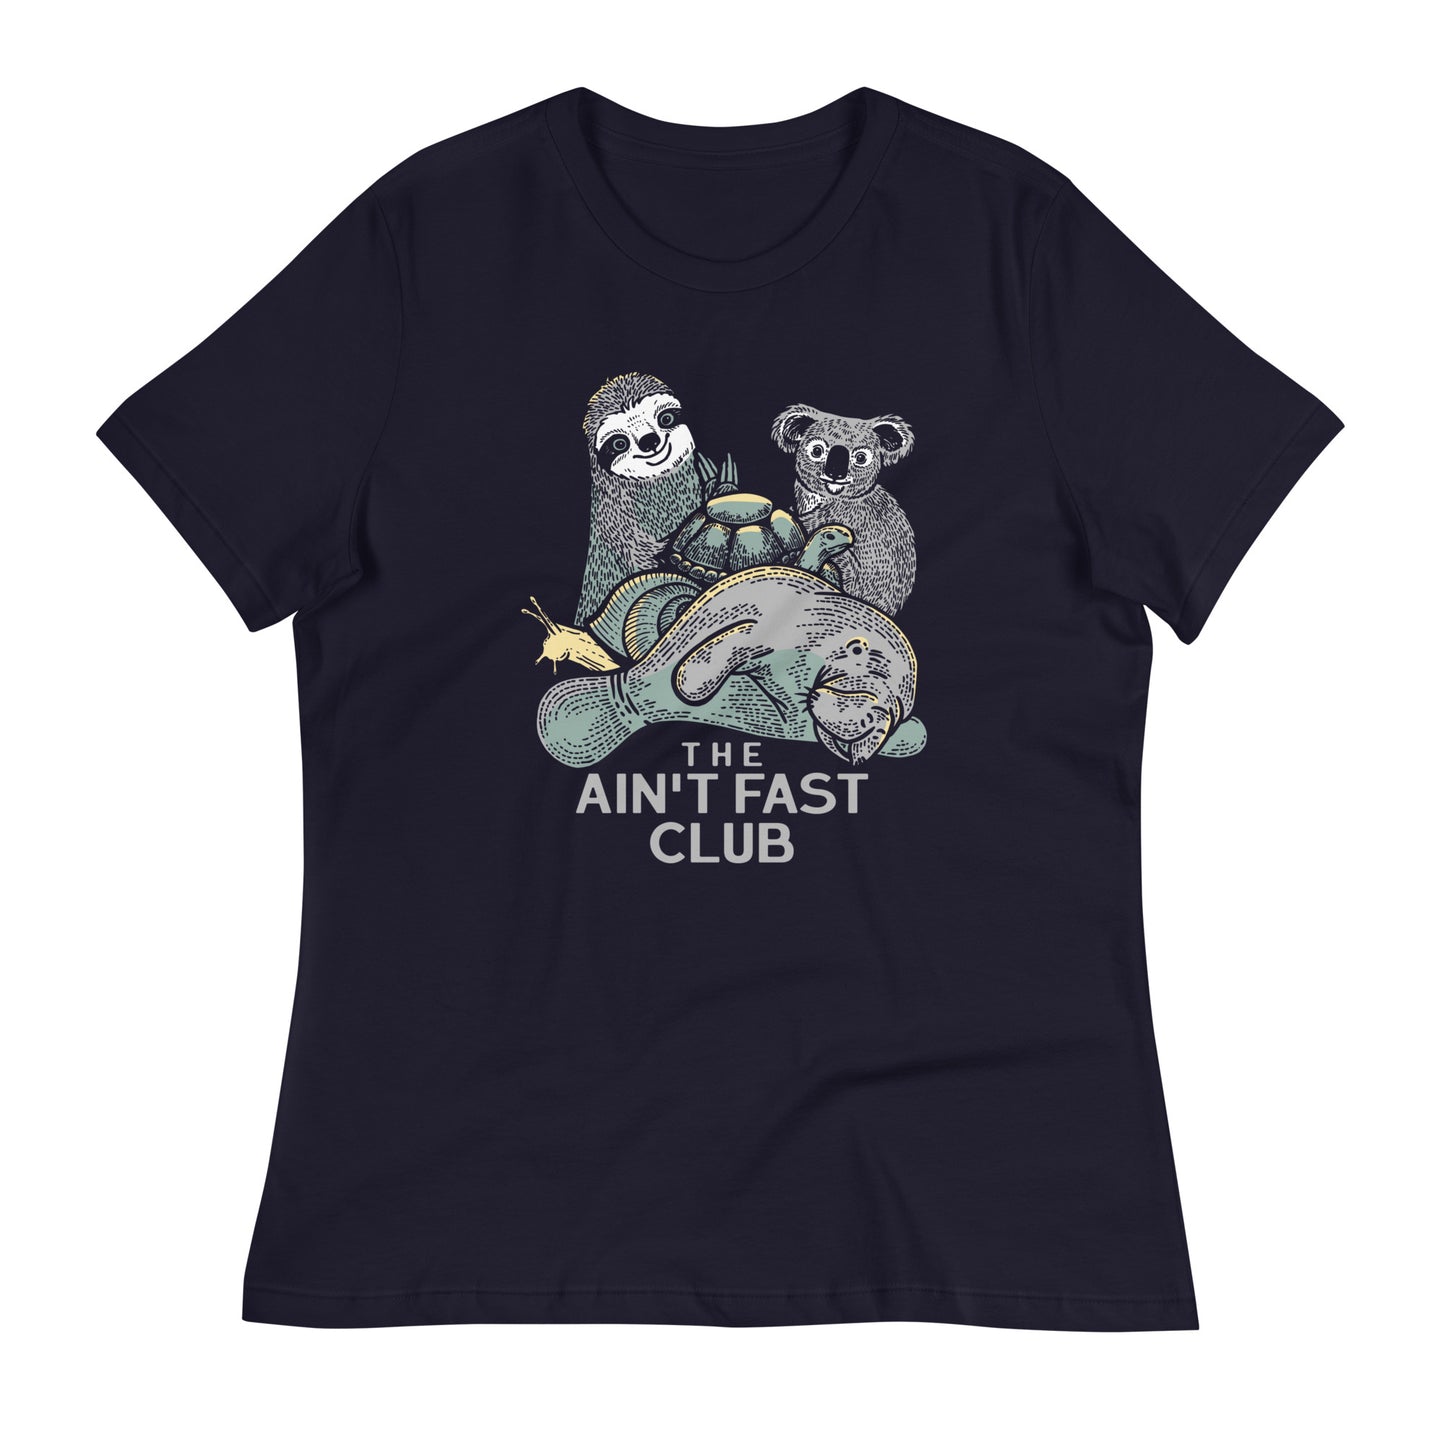 The Ain't Fast Club Women's Signature Tee